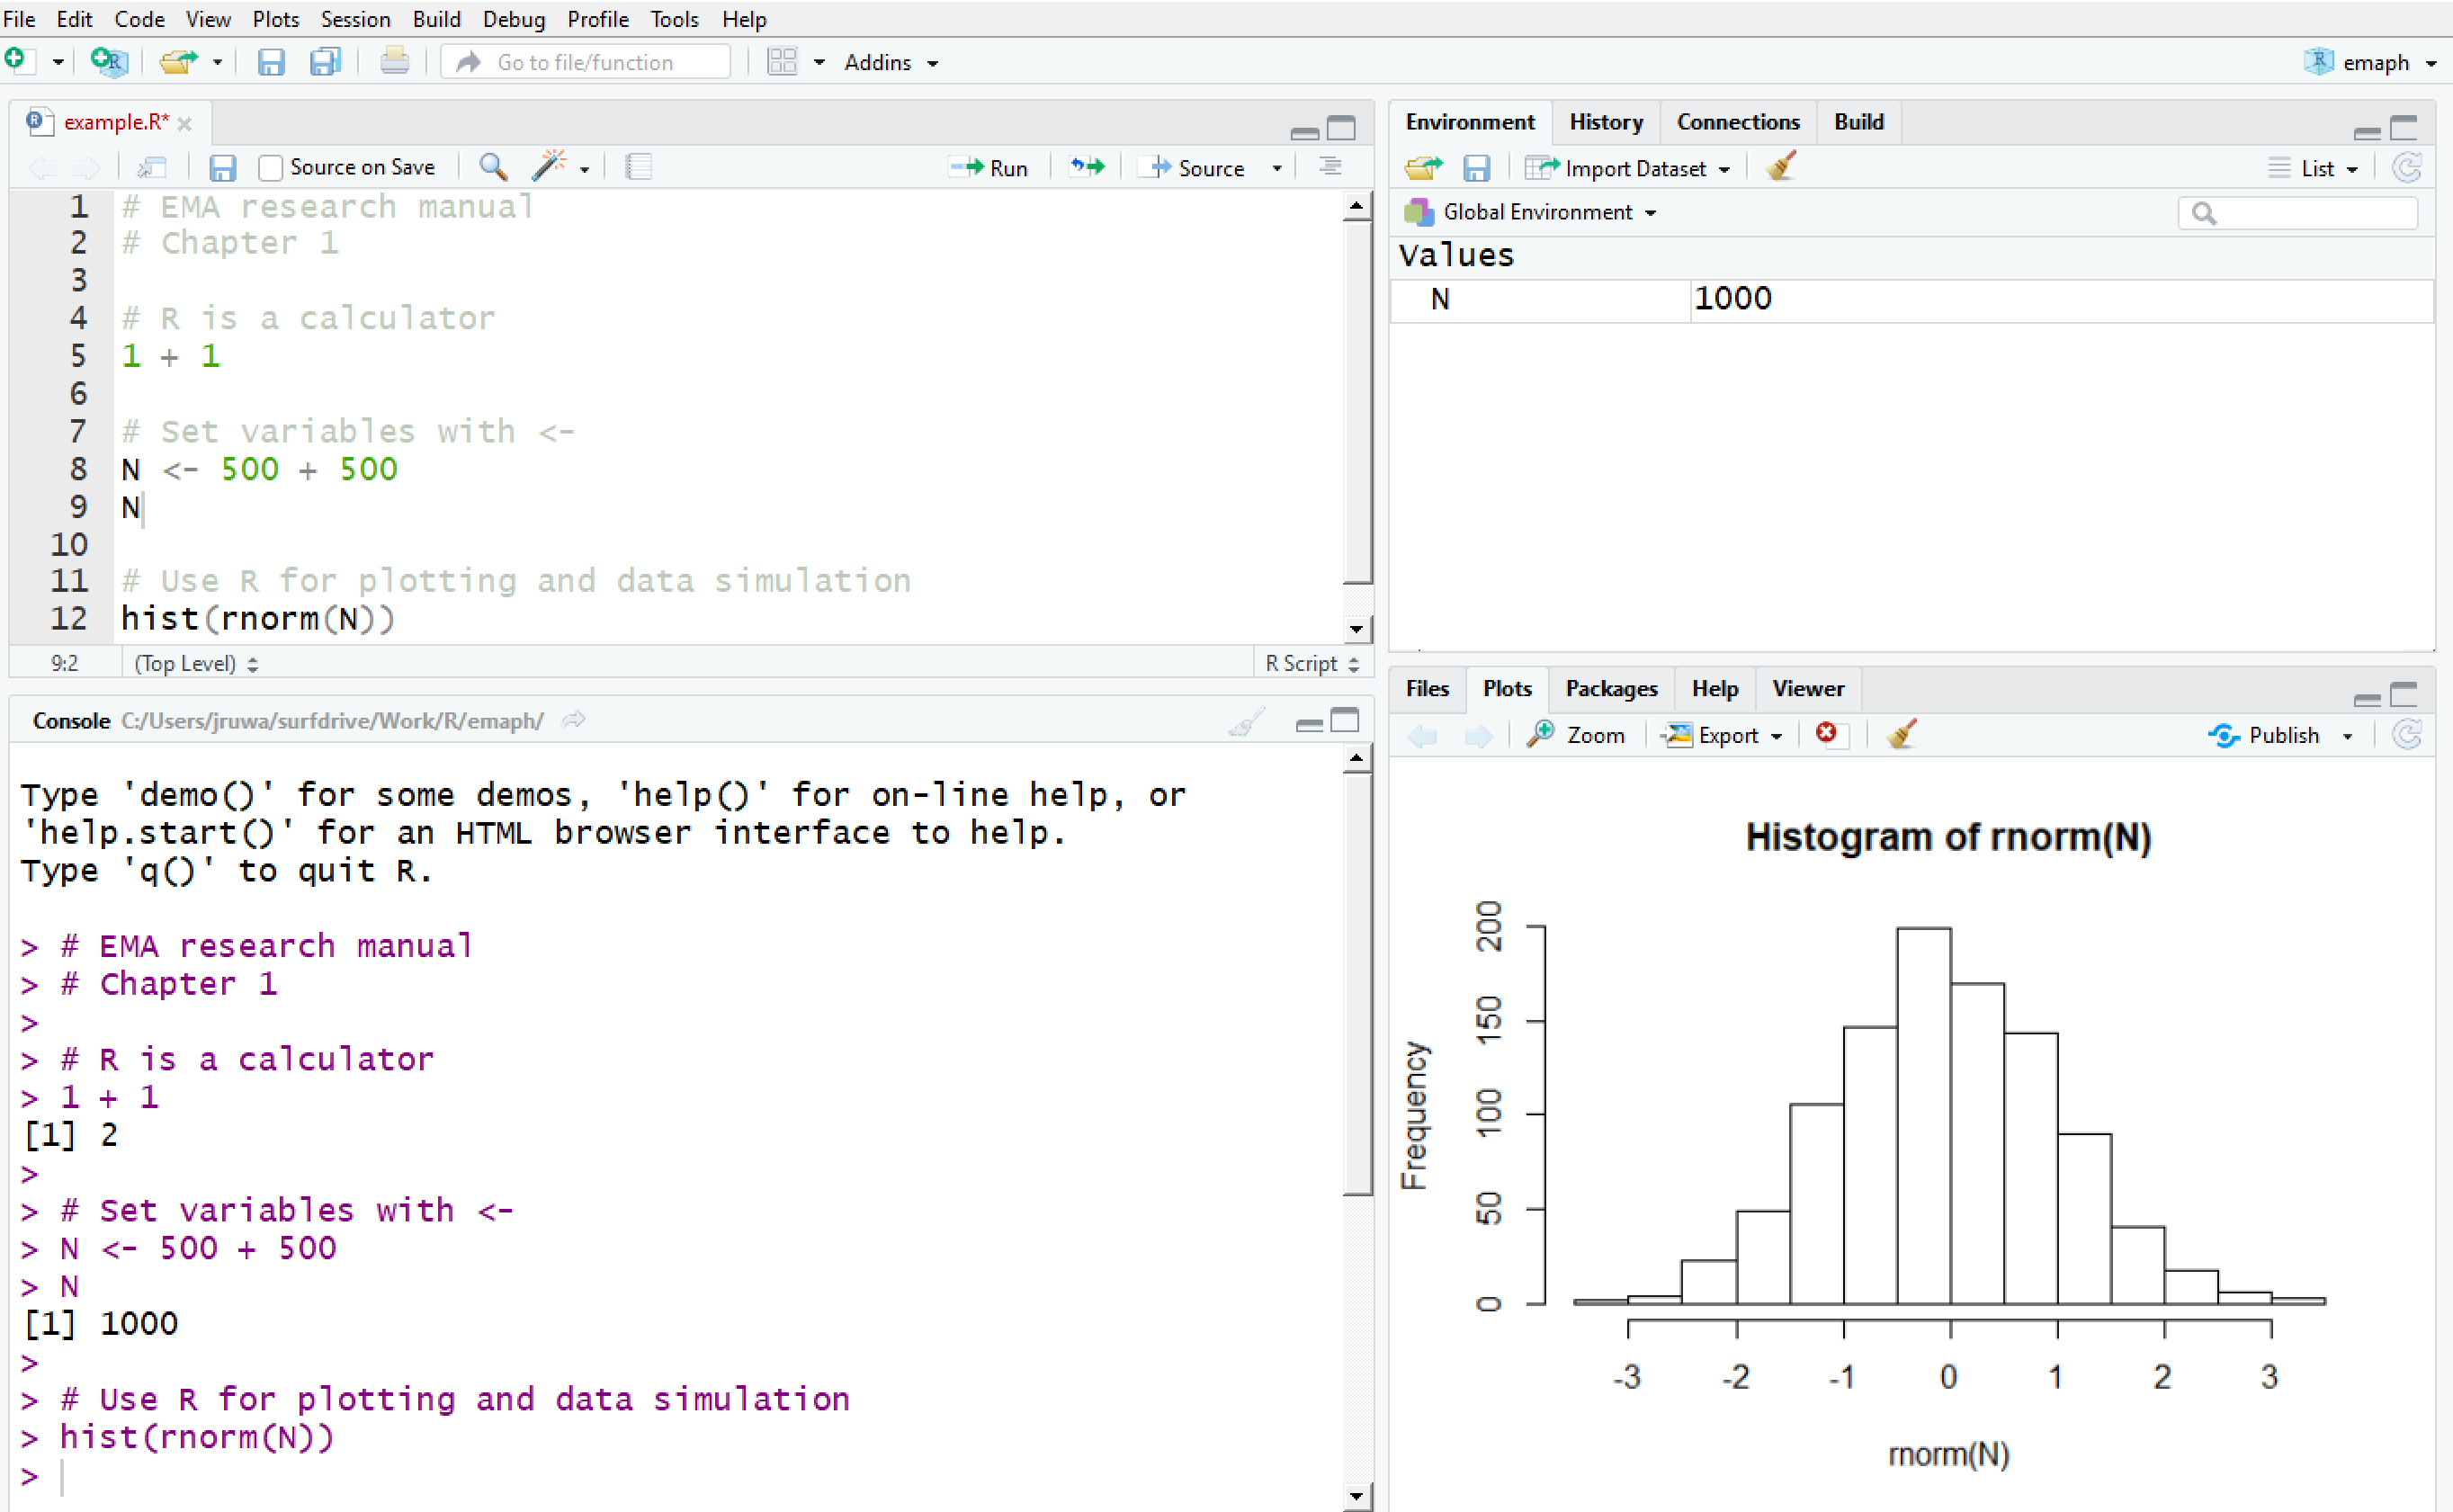 The RStudio Interface